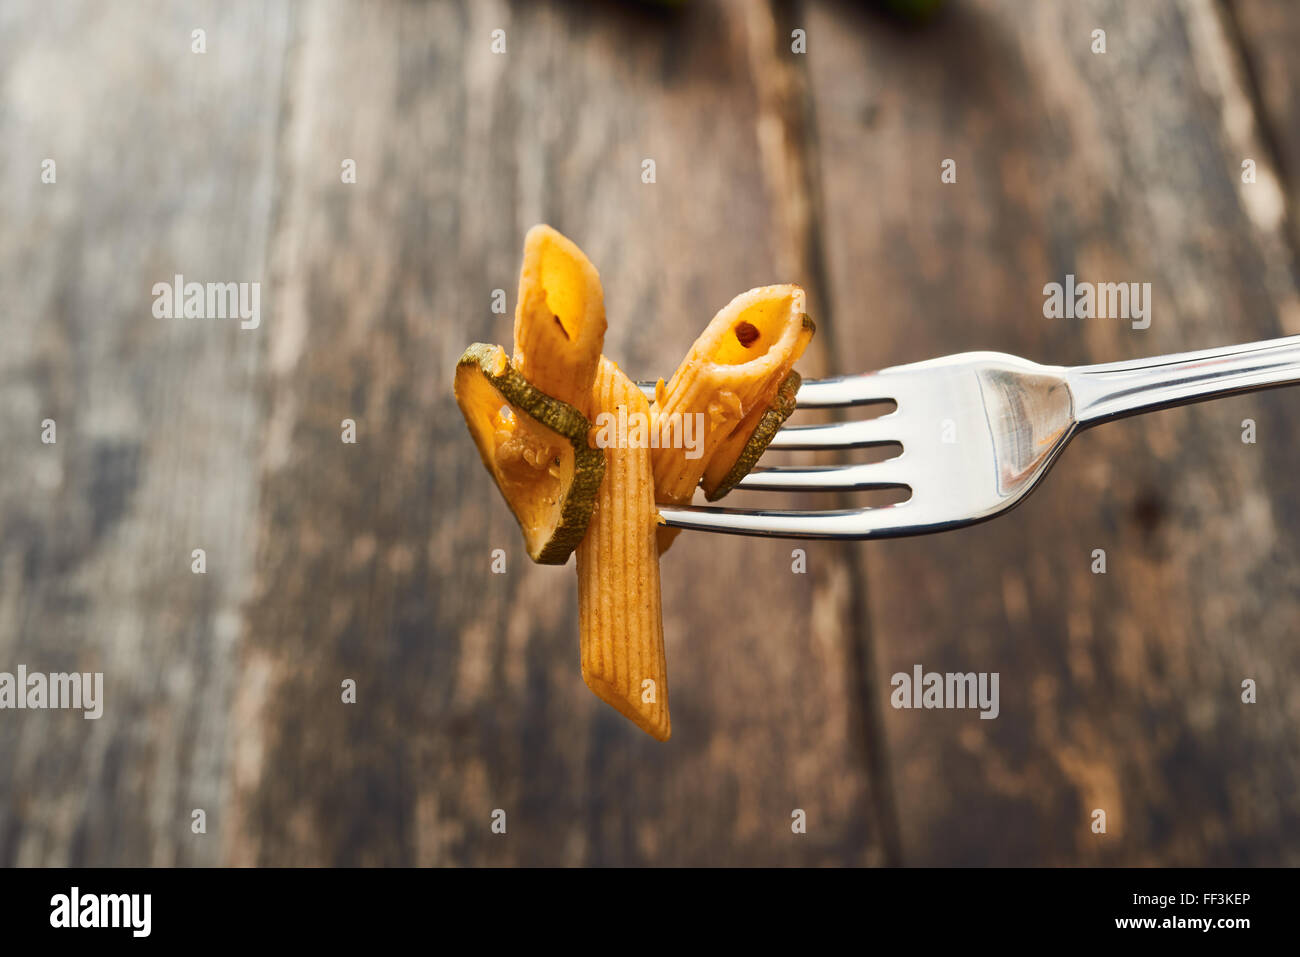 Whole wheat pasta with zucchini taken with fork Stock Photo